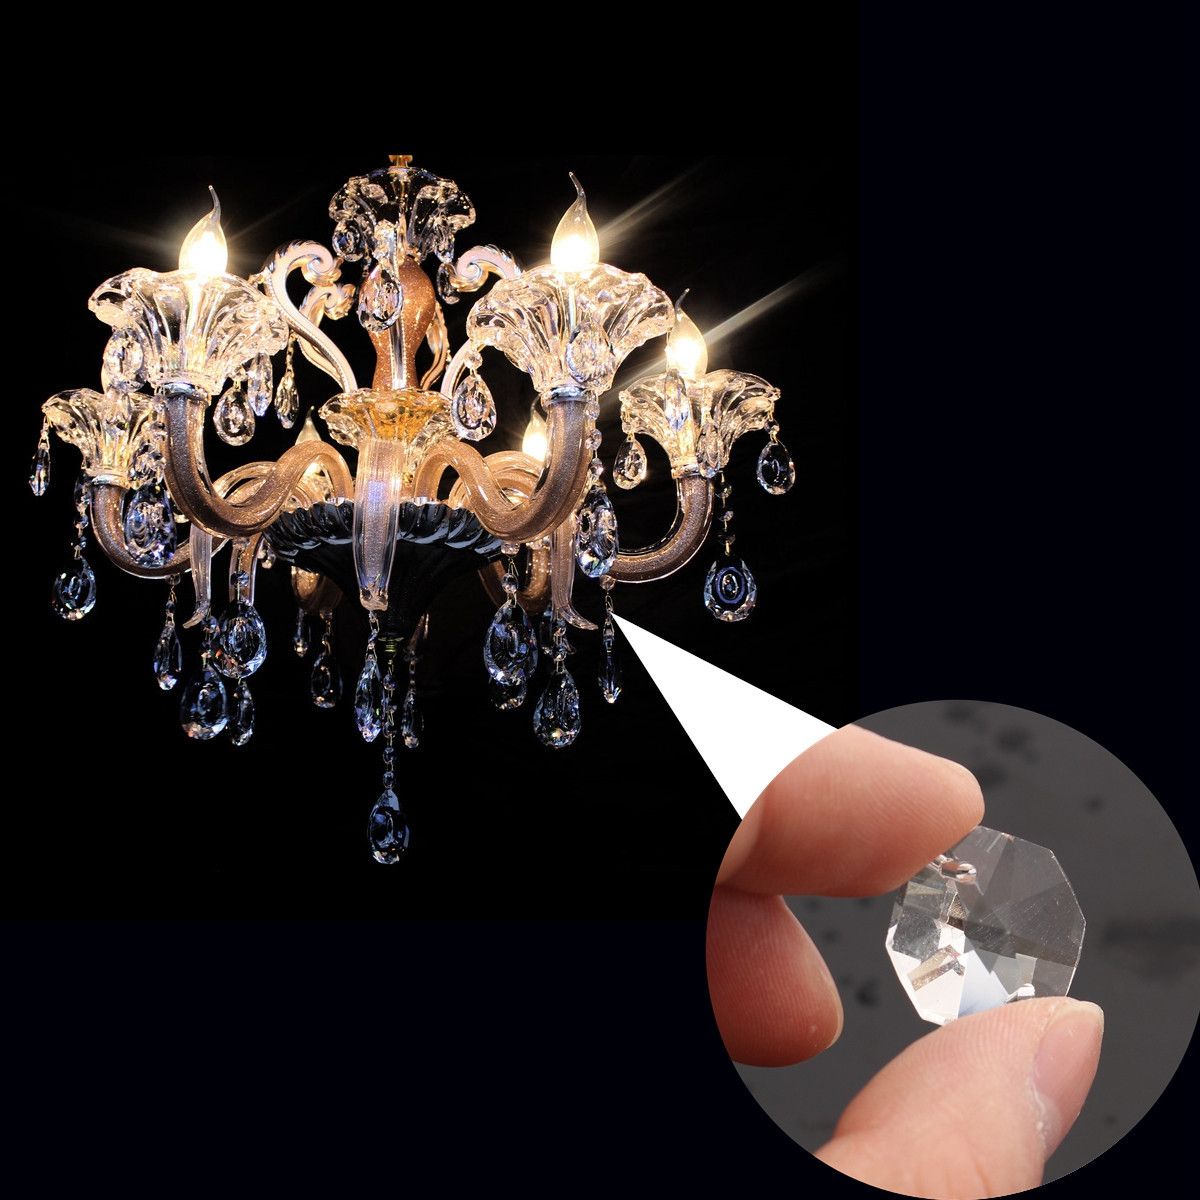 50pcs-Clear-Glass-Crystals-Chandelier-Pendant-Lamp-Prisms-Parts-Hanging-Drops-18MM-1105831